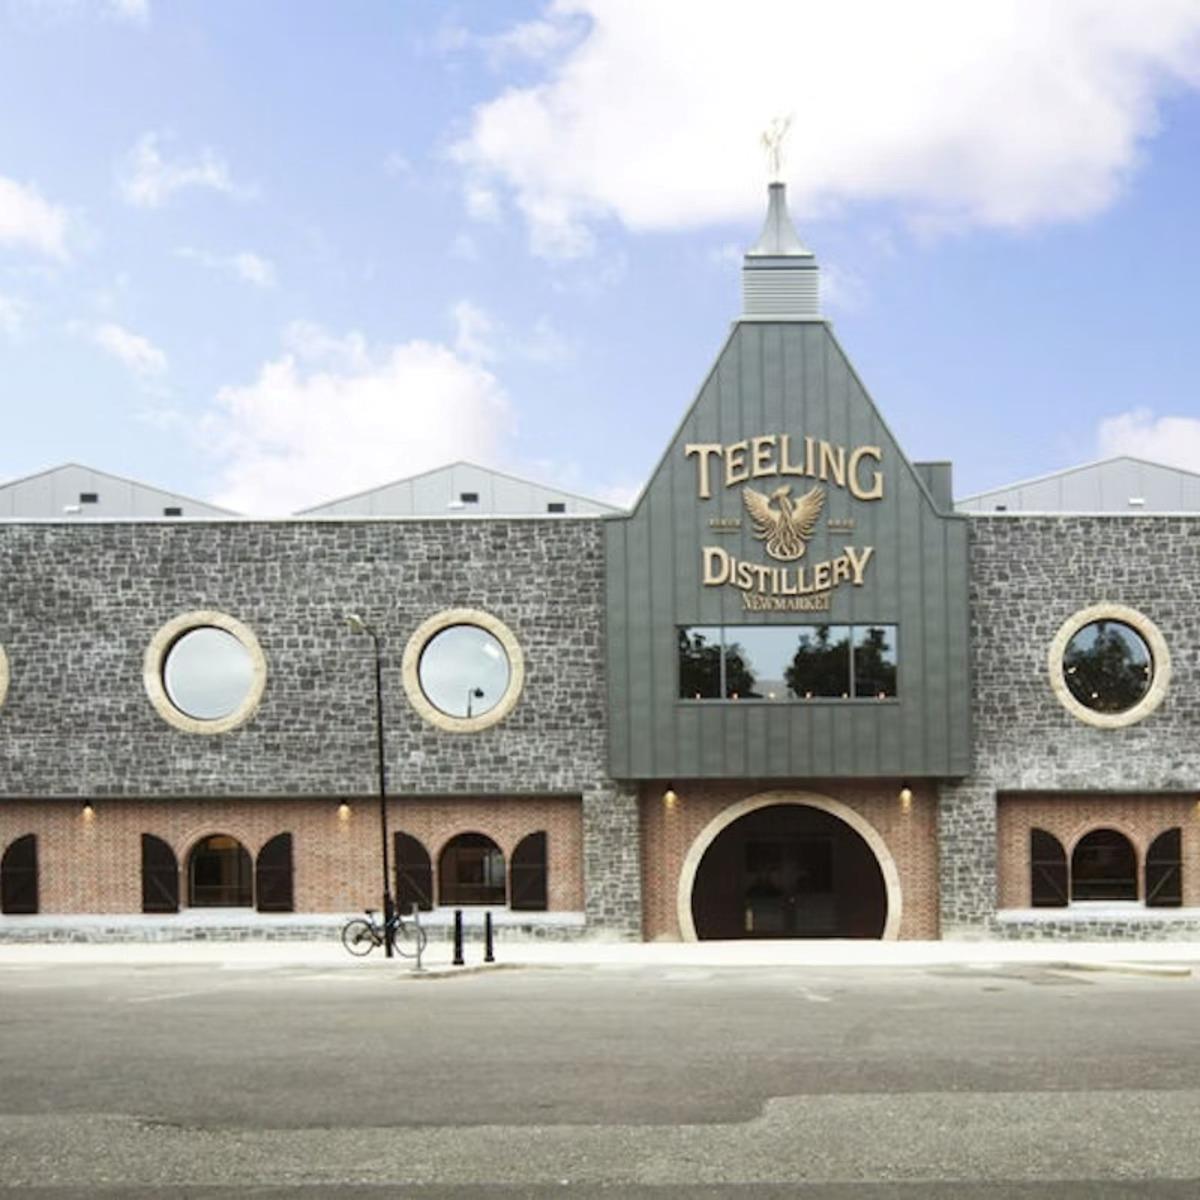 Teeling Whisky Distillery: Tasting and guided tour